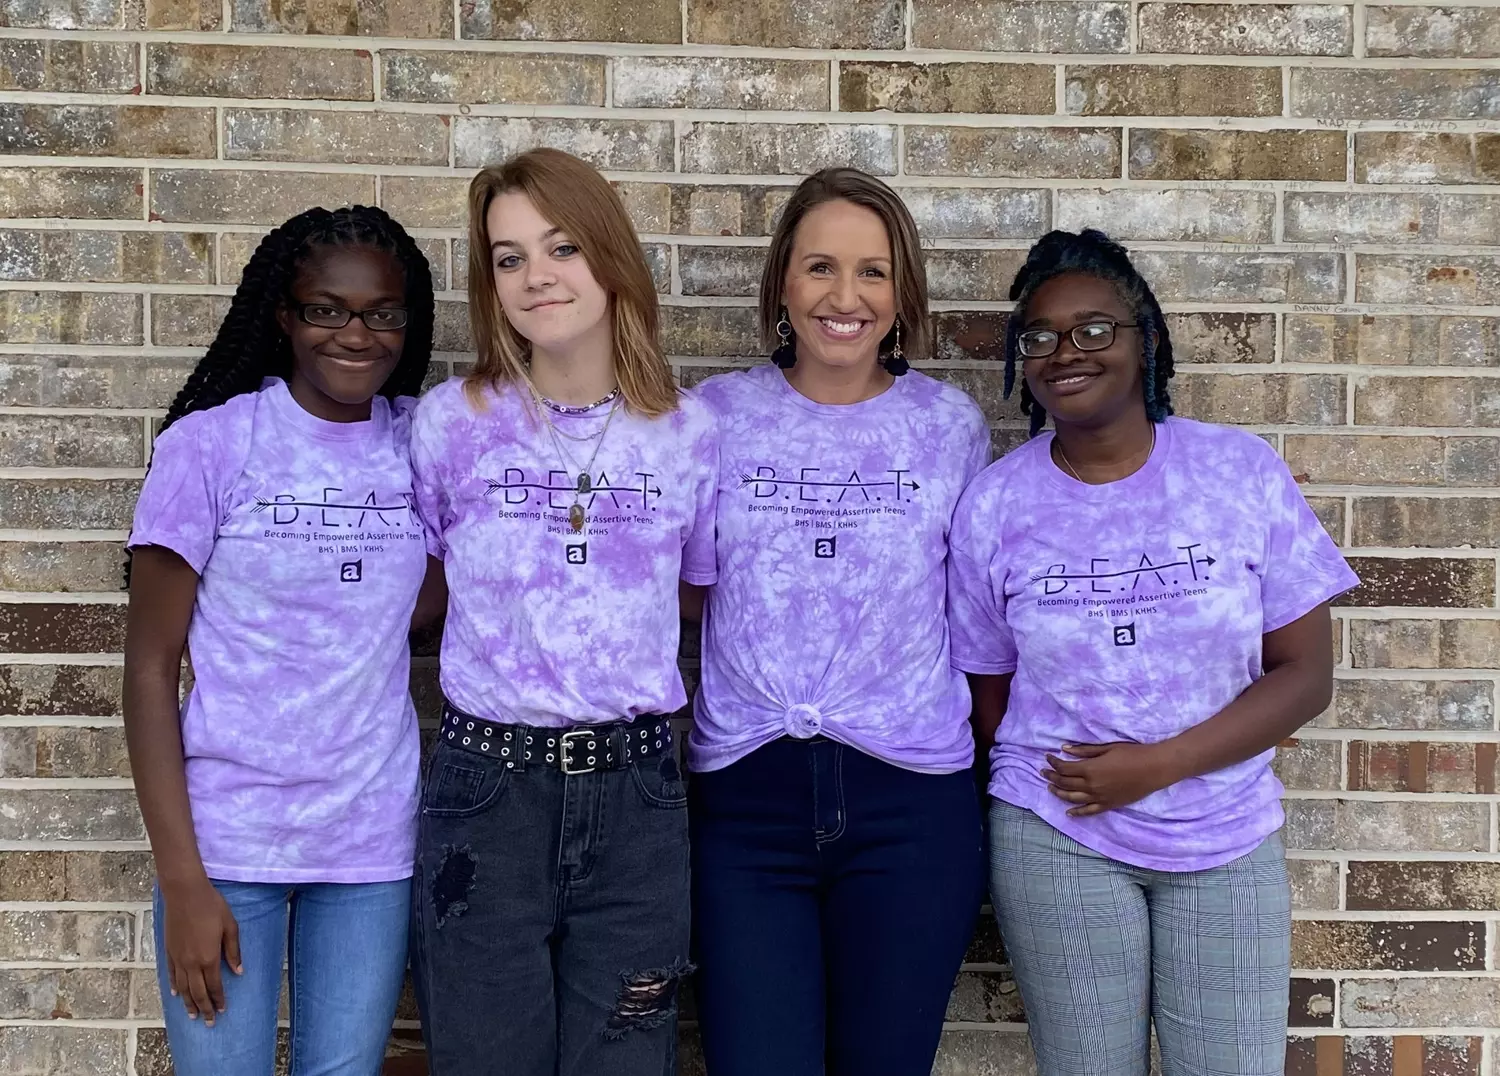 Florida center offers young women safe place to connect, find support